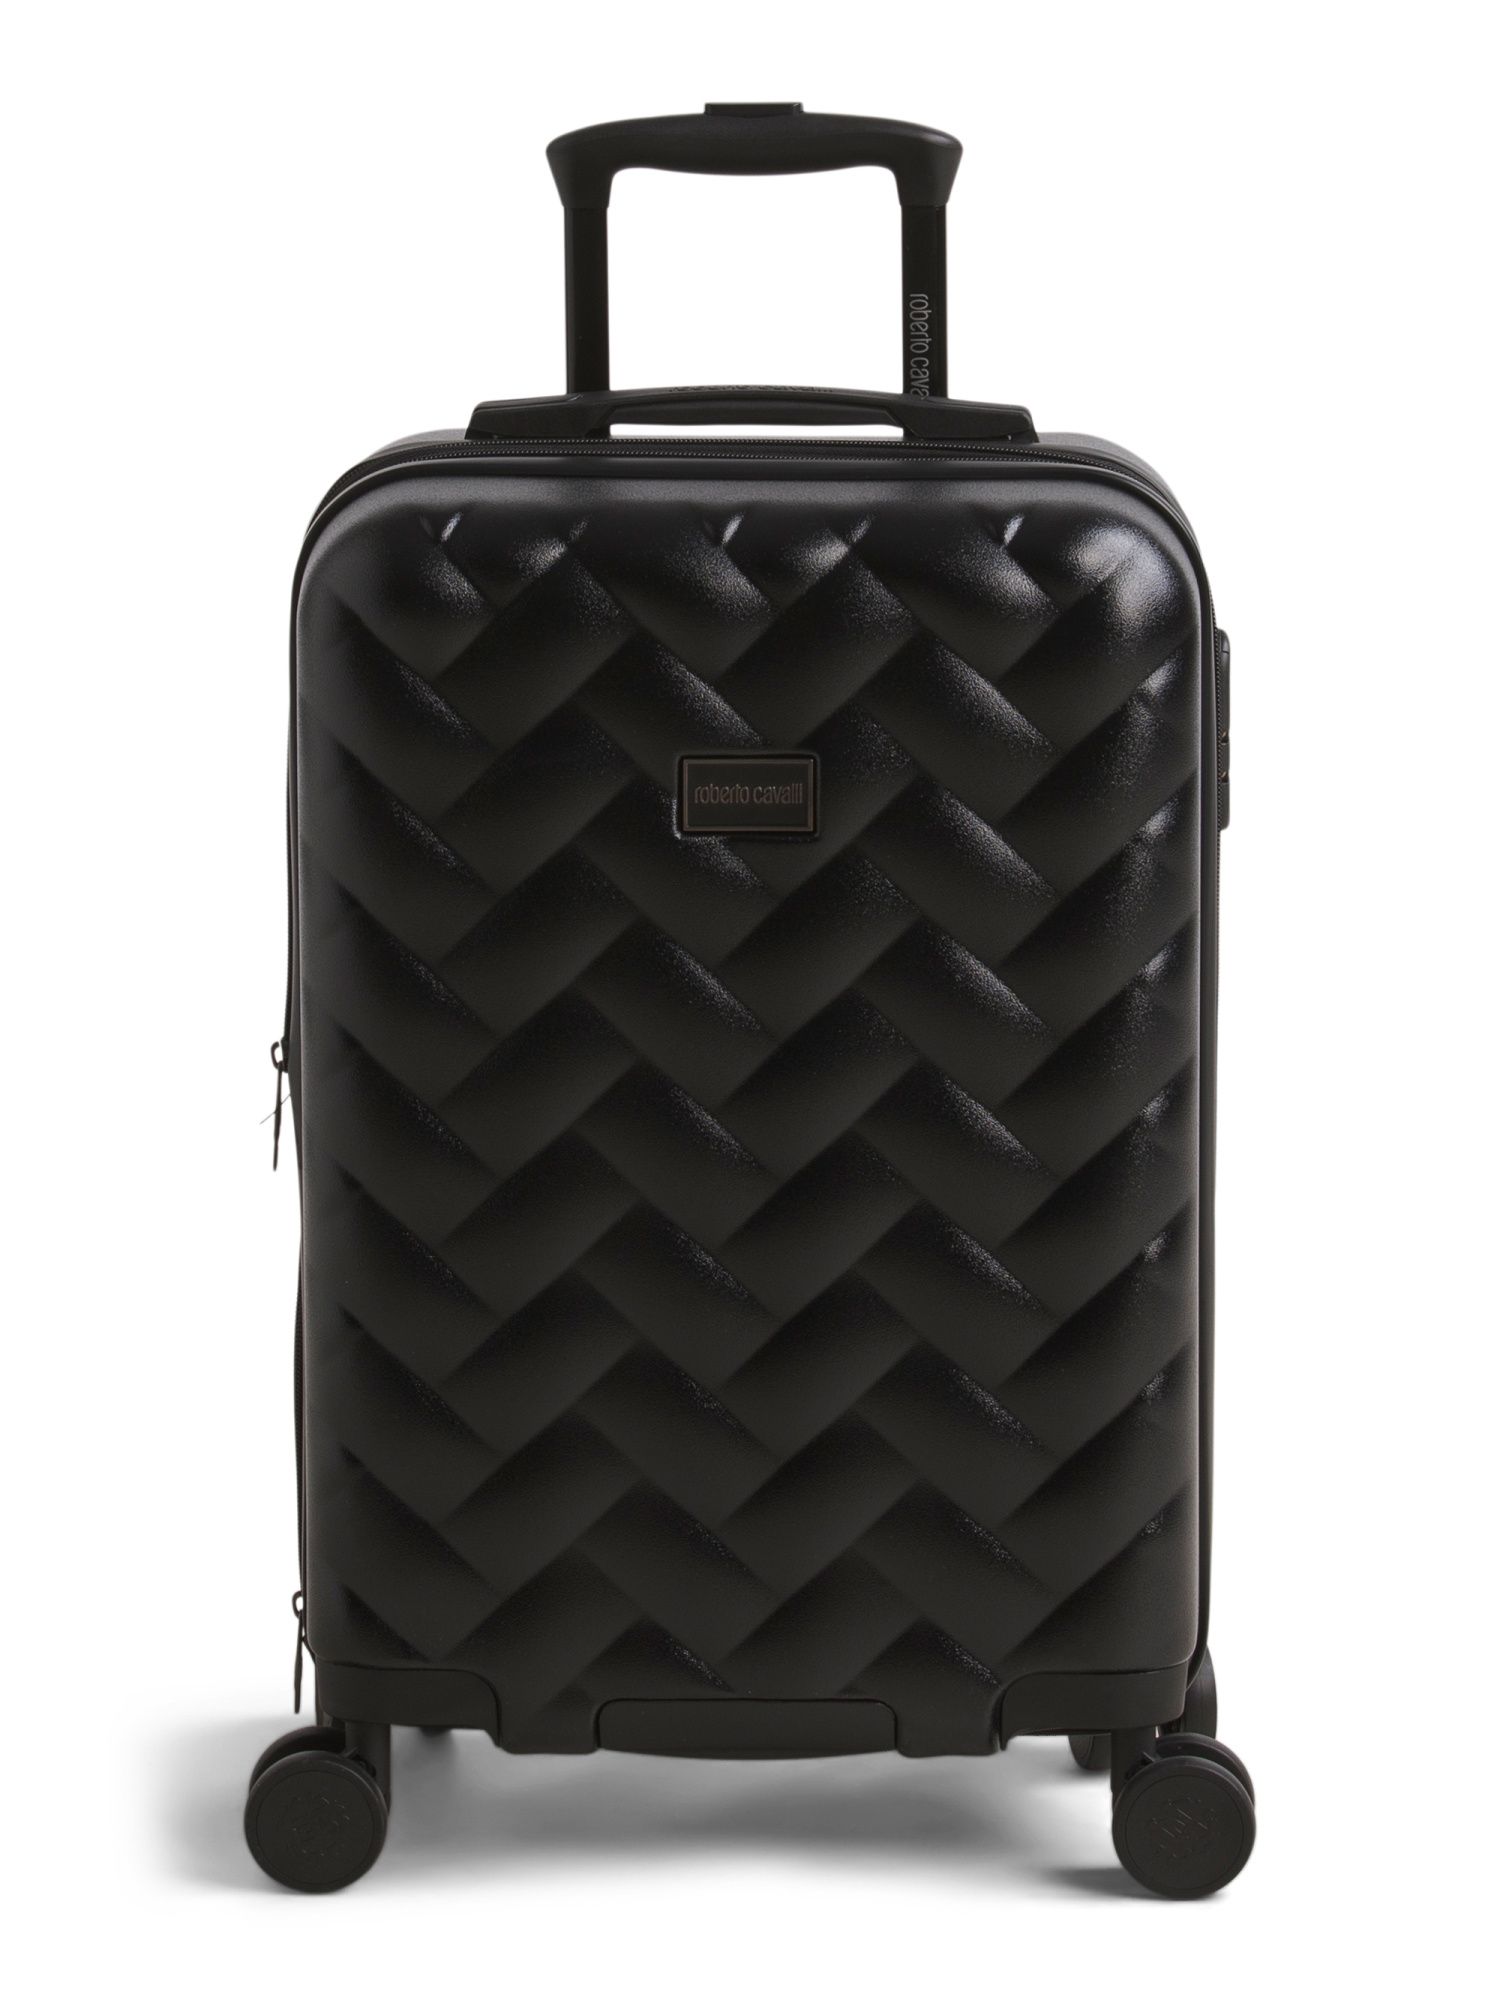 20in Molded Quilted Hardside Carry-on Spinner | TJ Maxx